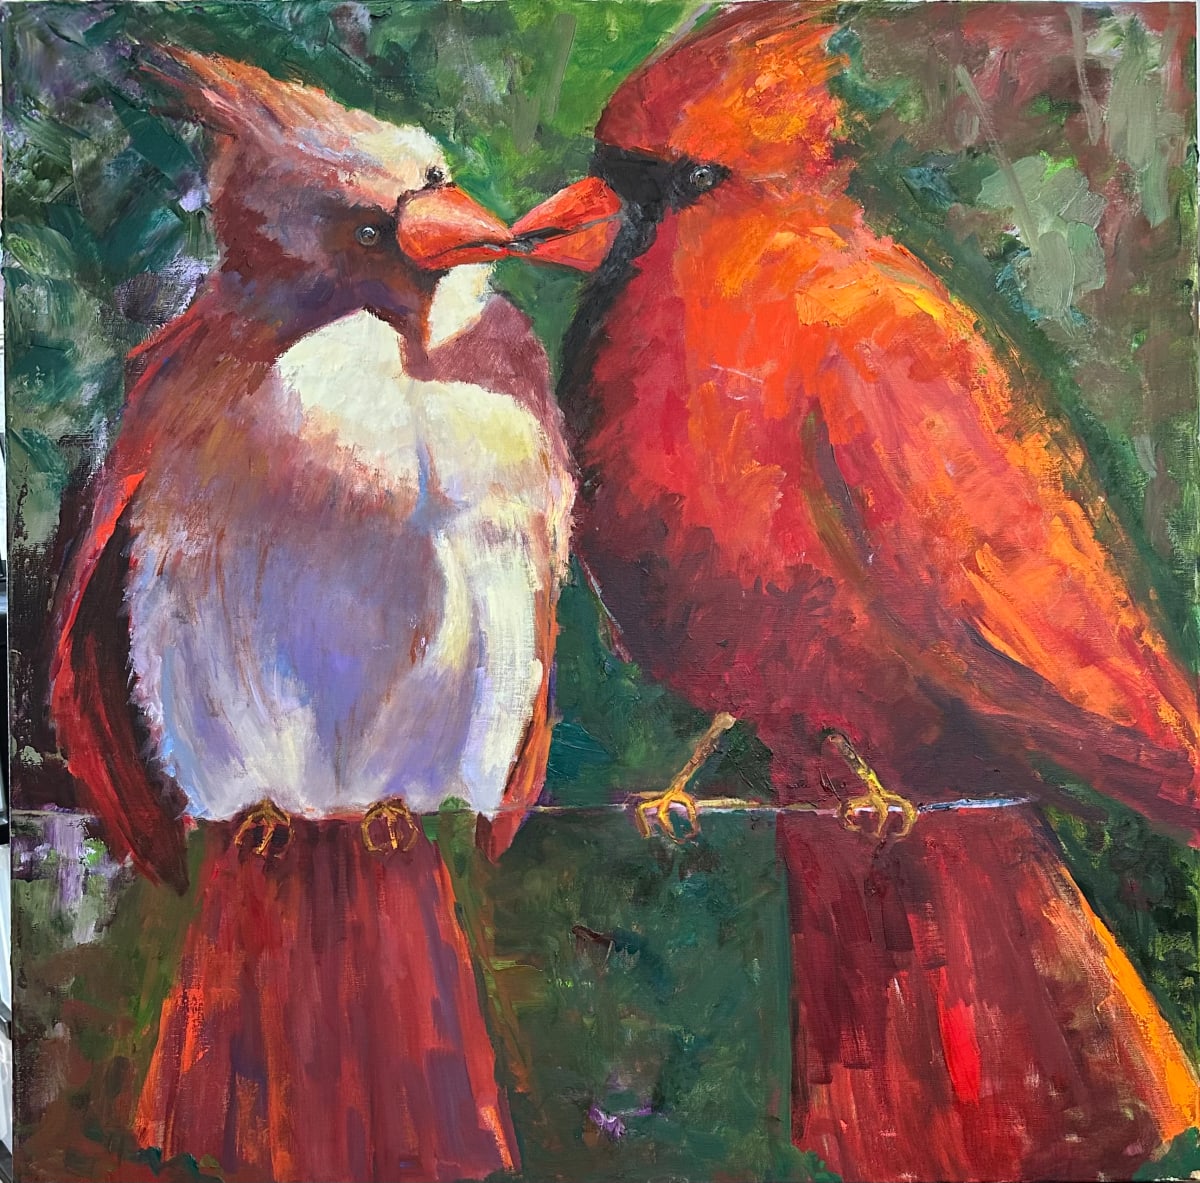 I Love You by susan tyler  Image: Cardinals mate for life. They are full time residents at my place in the country